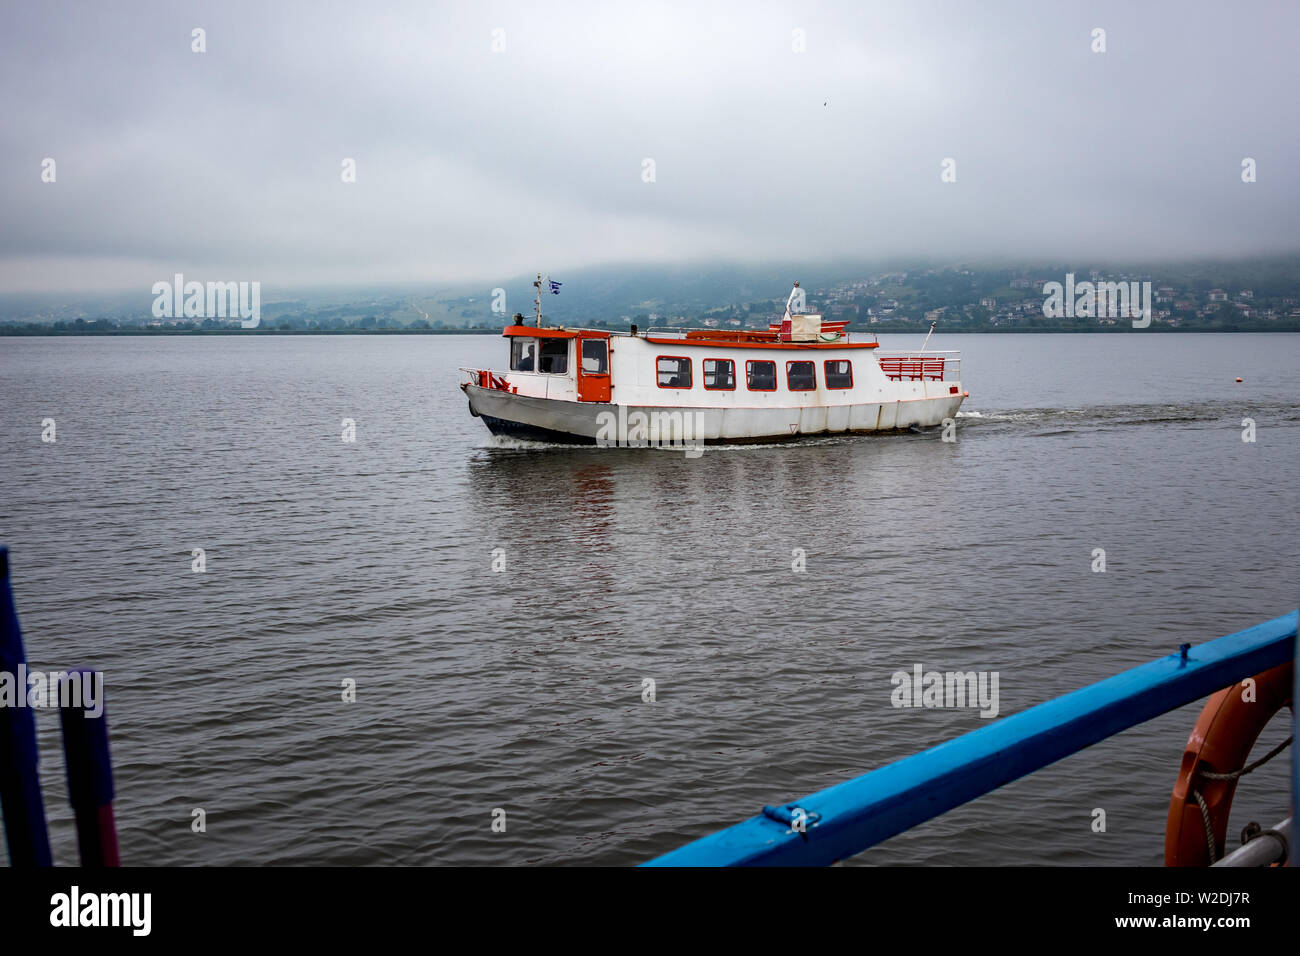 Lake Ioannina, Greece, small rusty old white and red ferryboat sailing in the waters of the lake between the island and the beautiful Greek town. Foggy spring morning Stock Photo